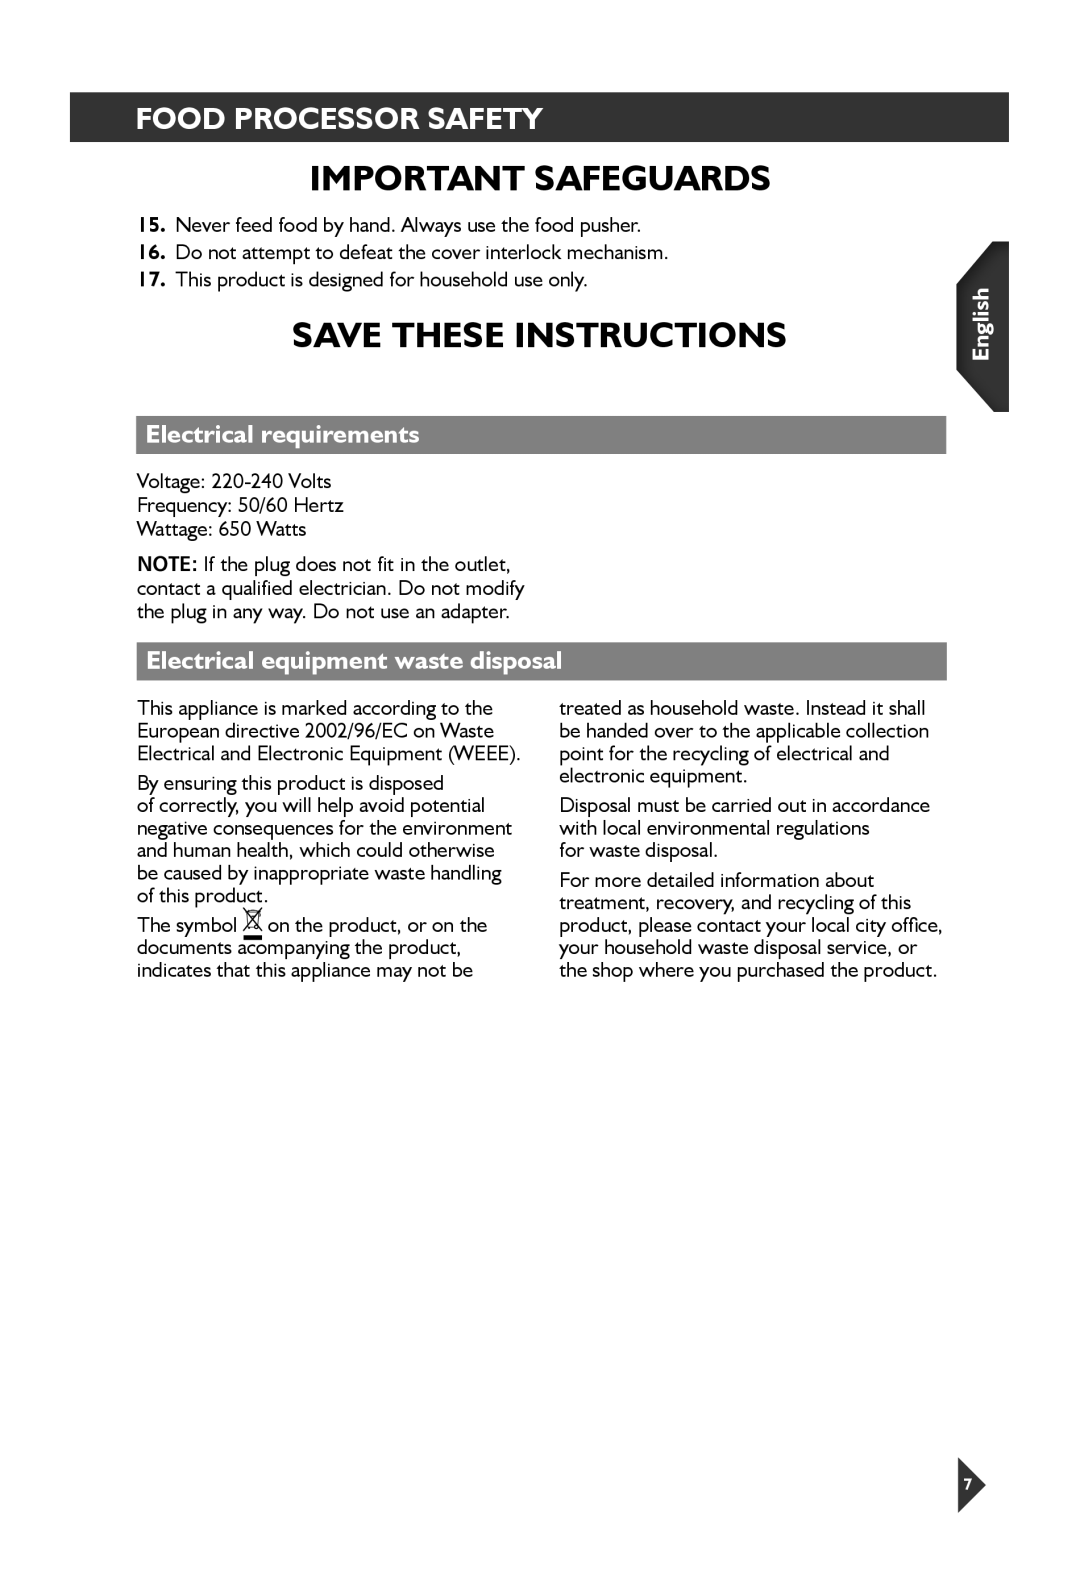 KitchenAid 5KFP1644 manual Save These Instructions, Electrical requirements, Electrical equipment waste disposal, English 